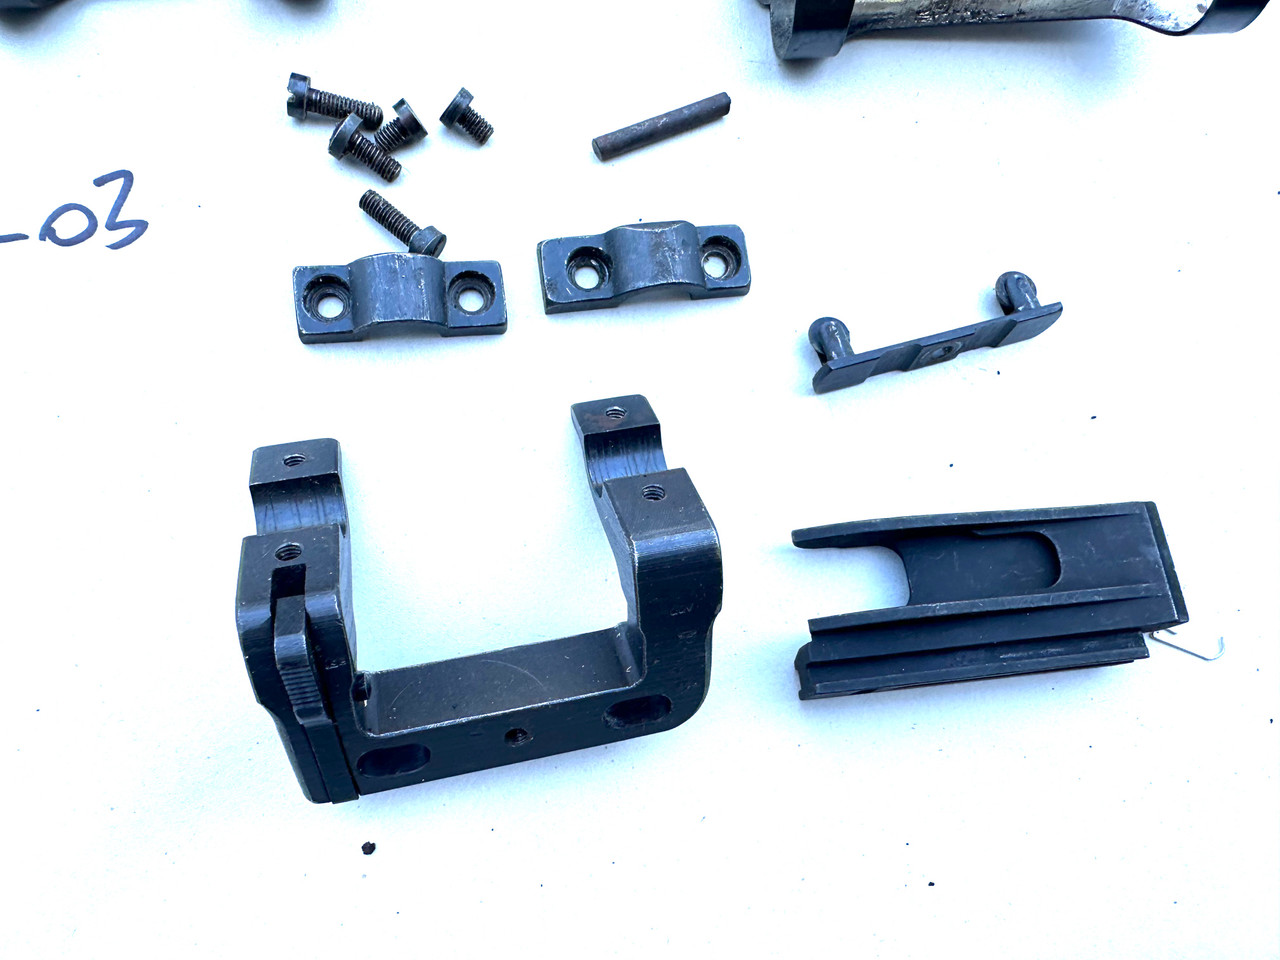 LOT MT-230908-03: ZF41 Mounts, Very Rare 33/40 ZF41 base, and other Mauser Parts